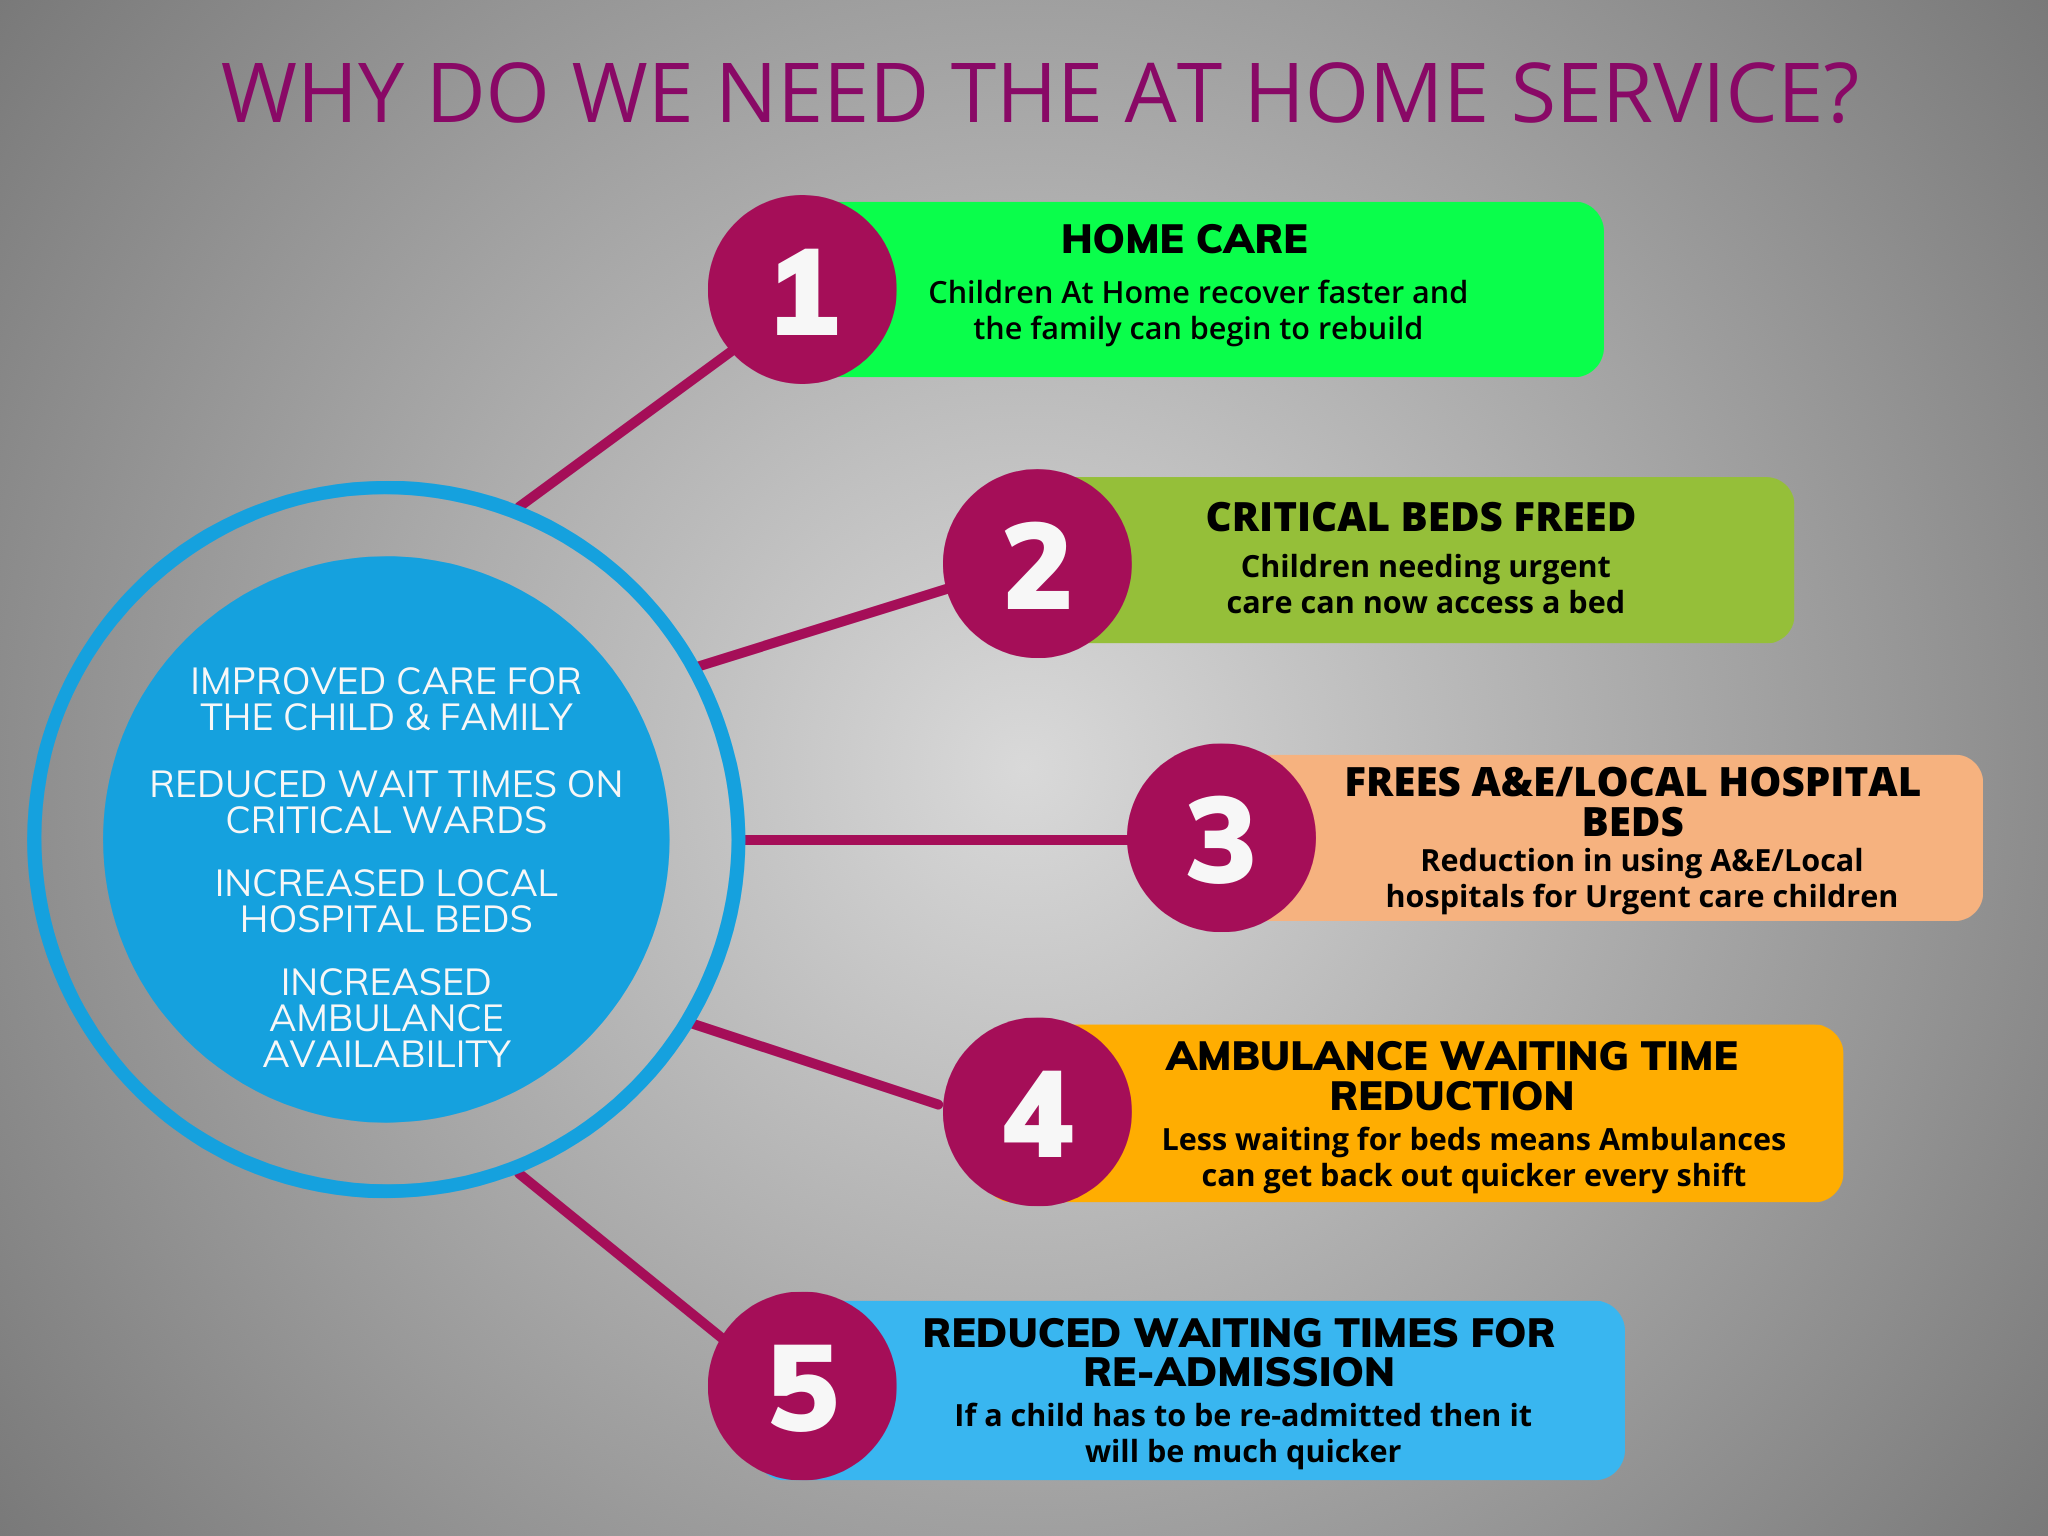 Why do we need the At Home Service